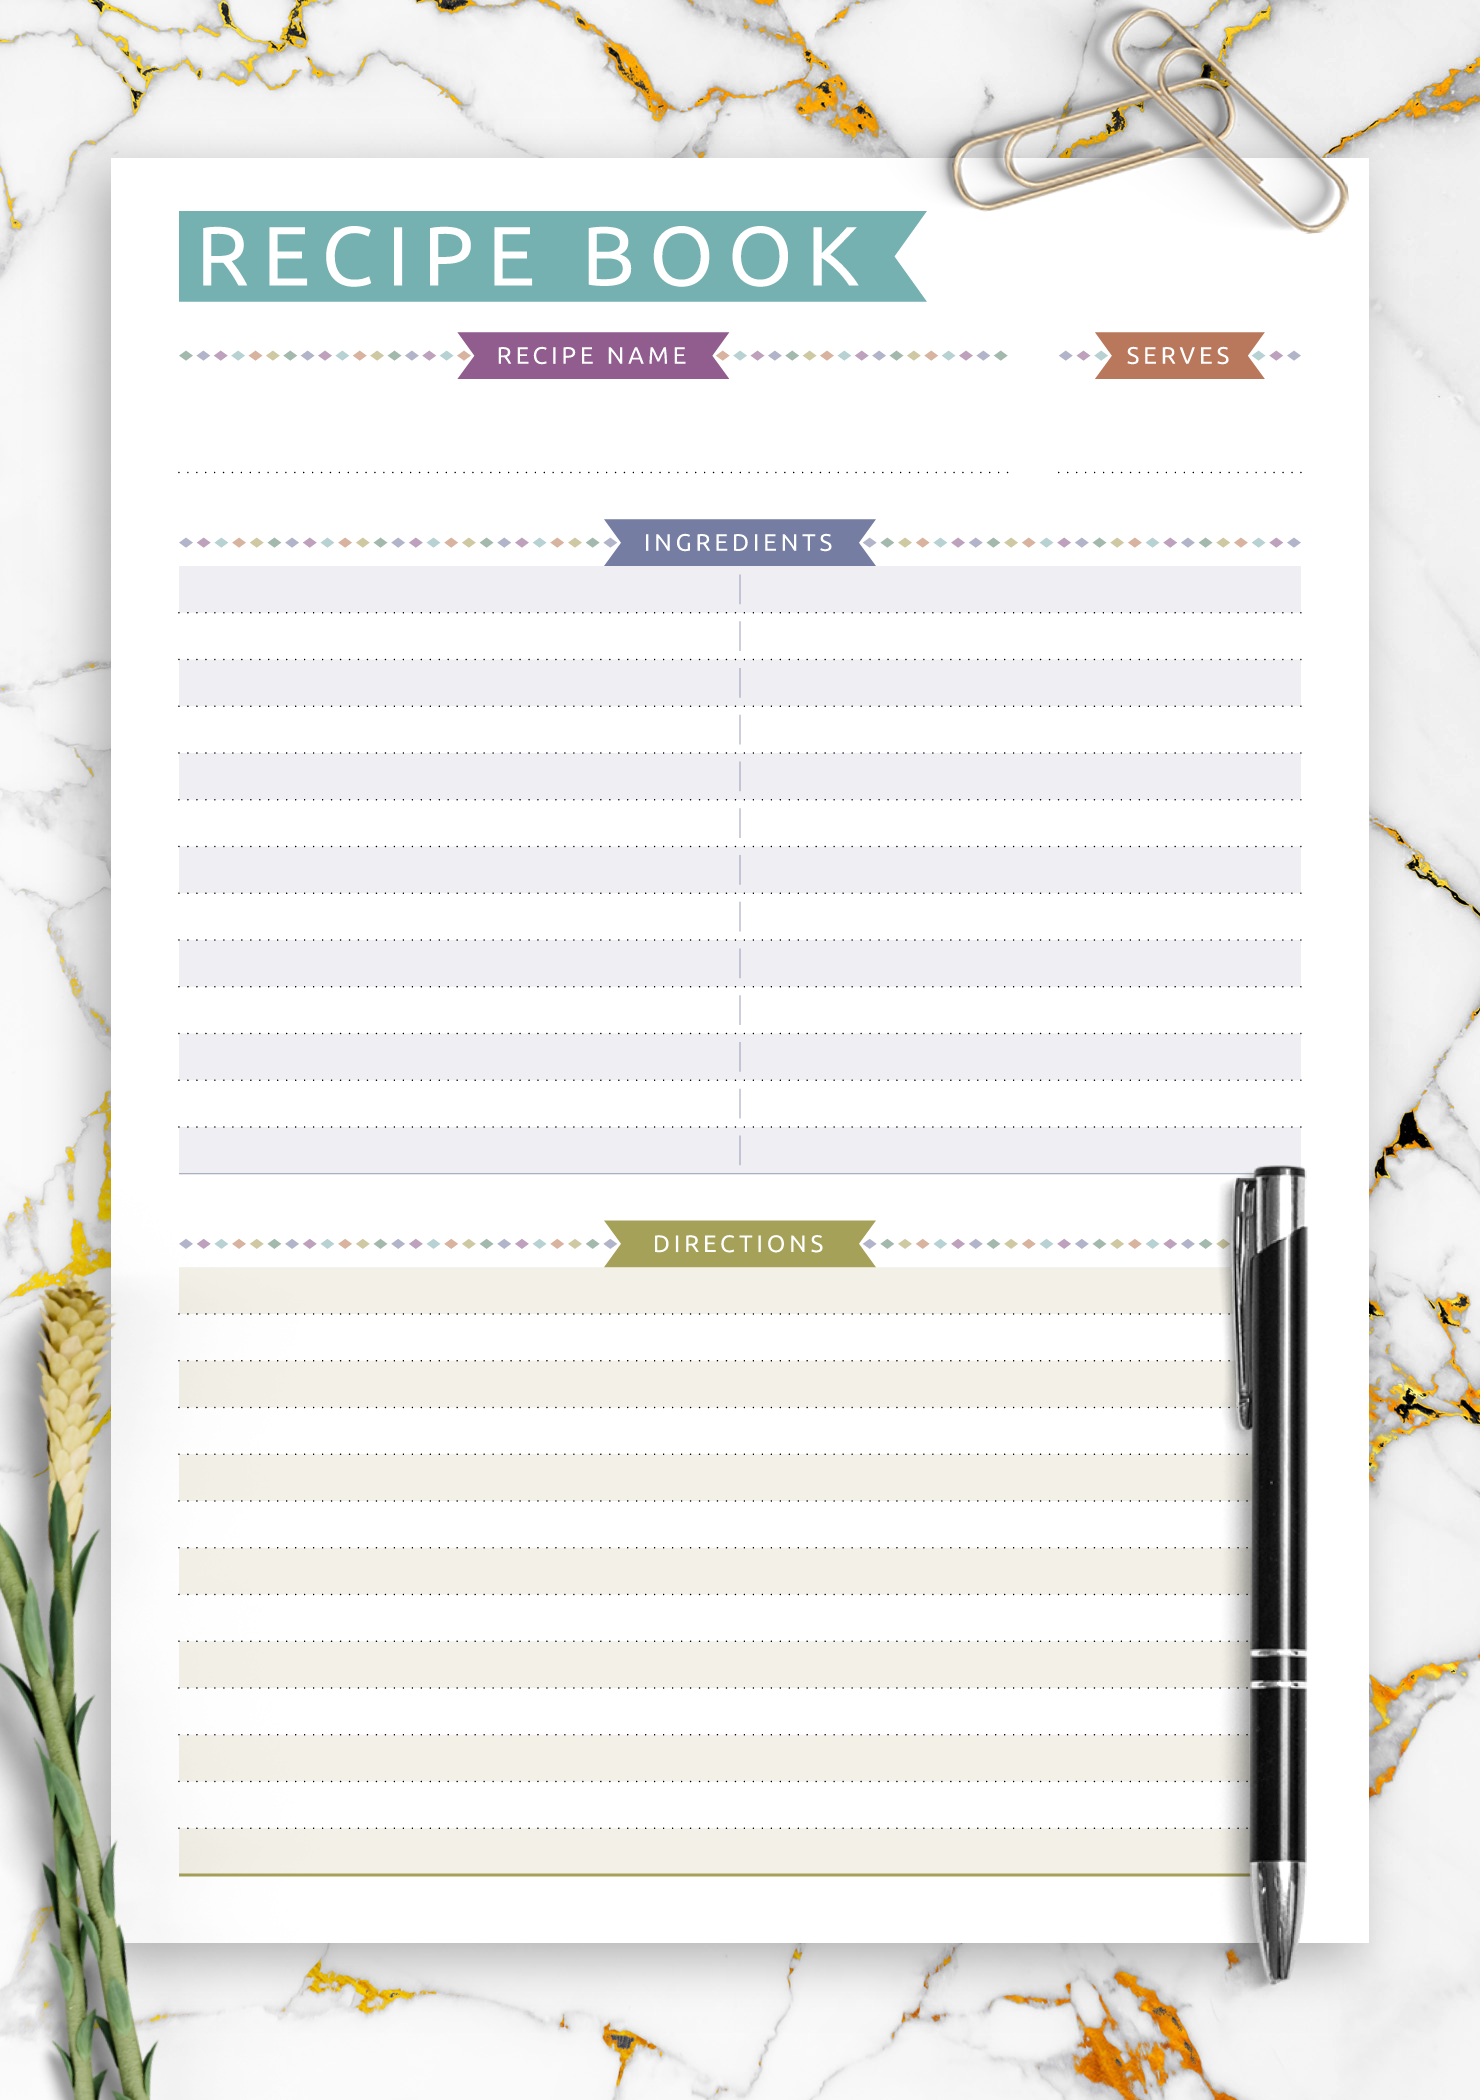 https://onplanners.com/sites/default/files/styles/template_fancy/public/template-images/printable-recipe-book-template-casual-style-template.png